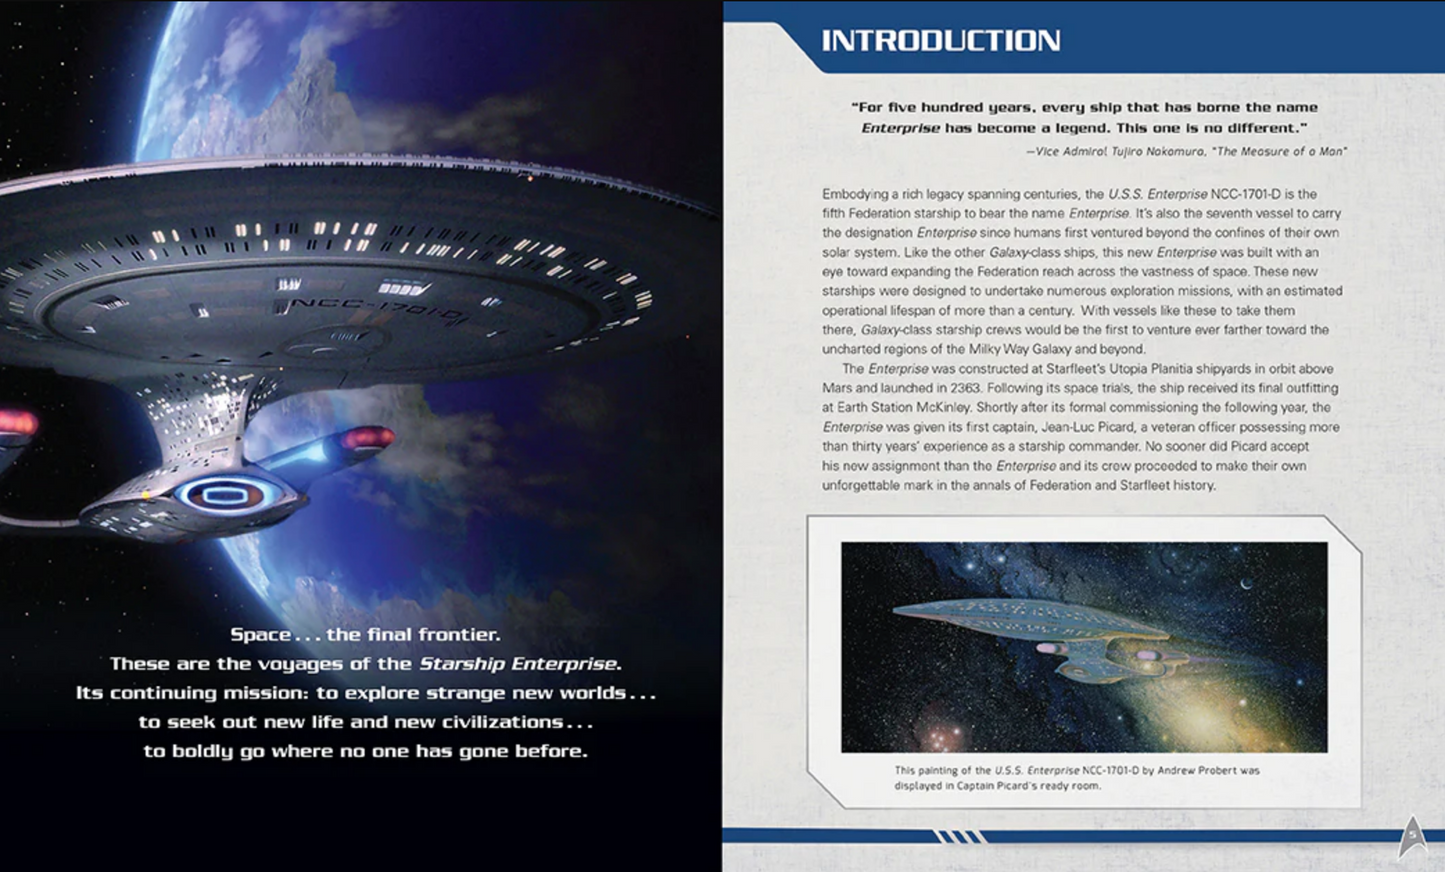 An introduction page with an image of the USS Enterprise, along with a brief history of the ship.